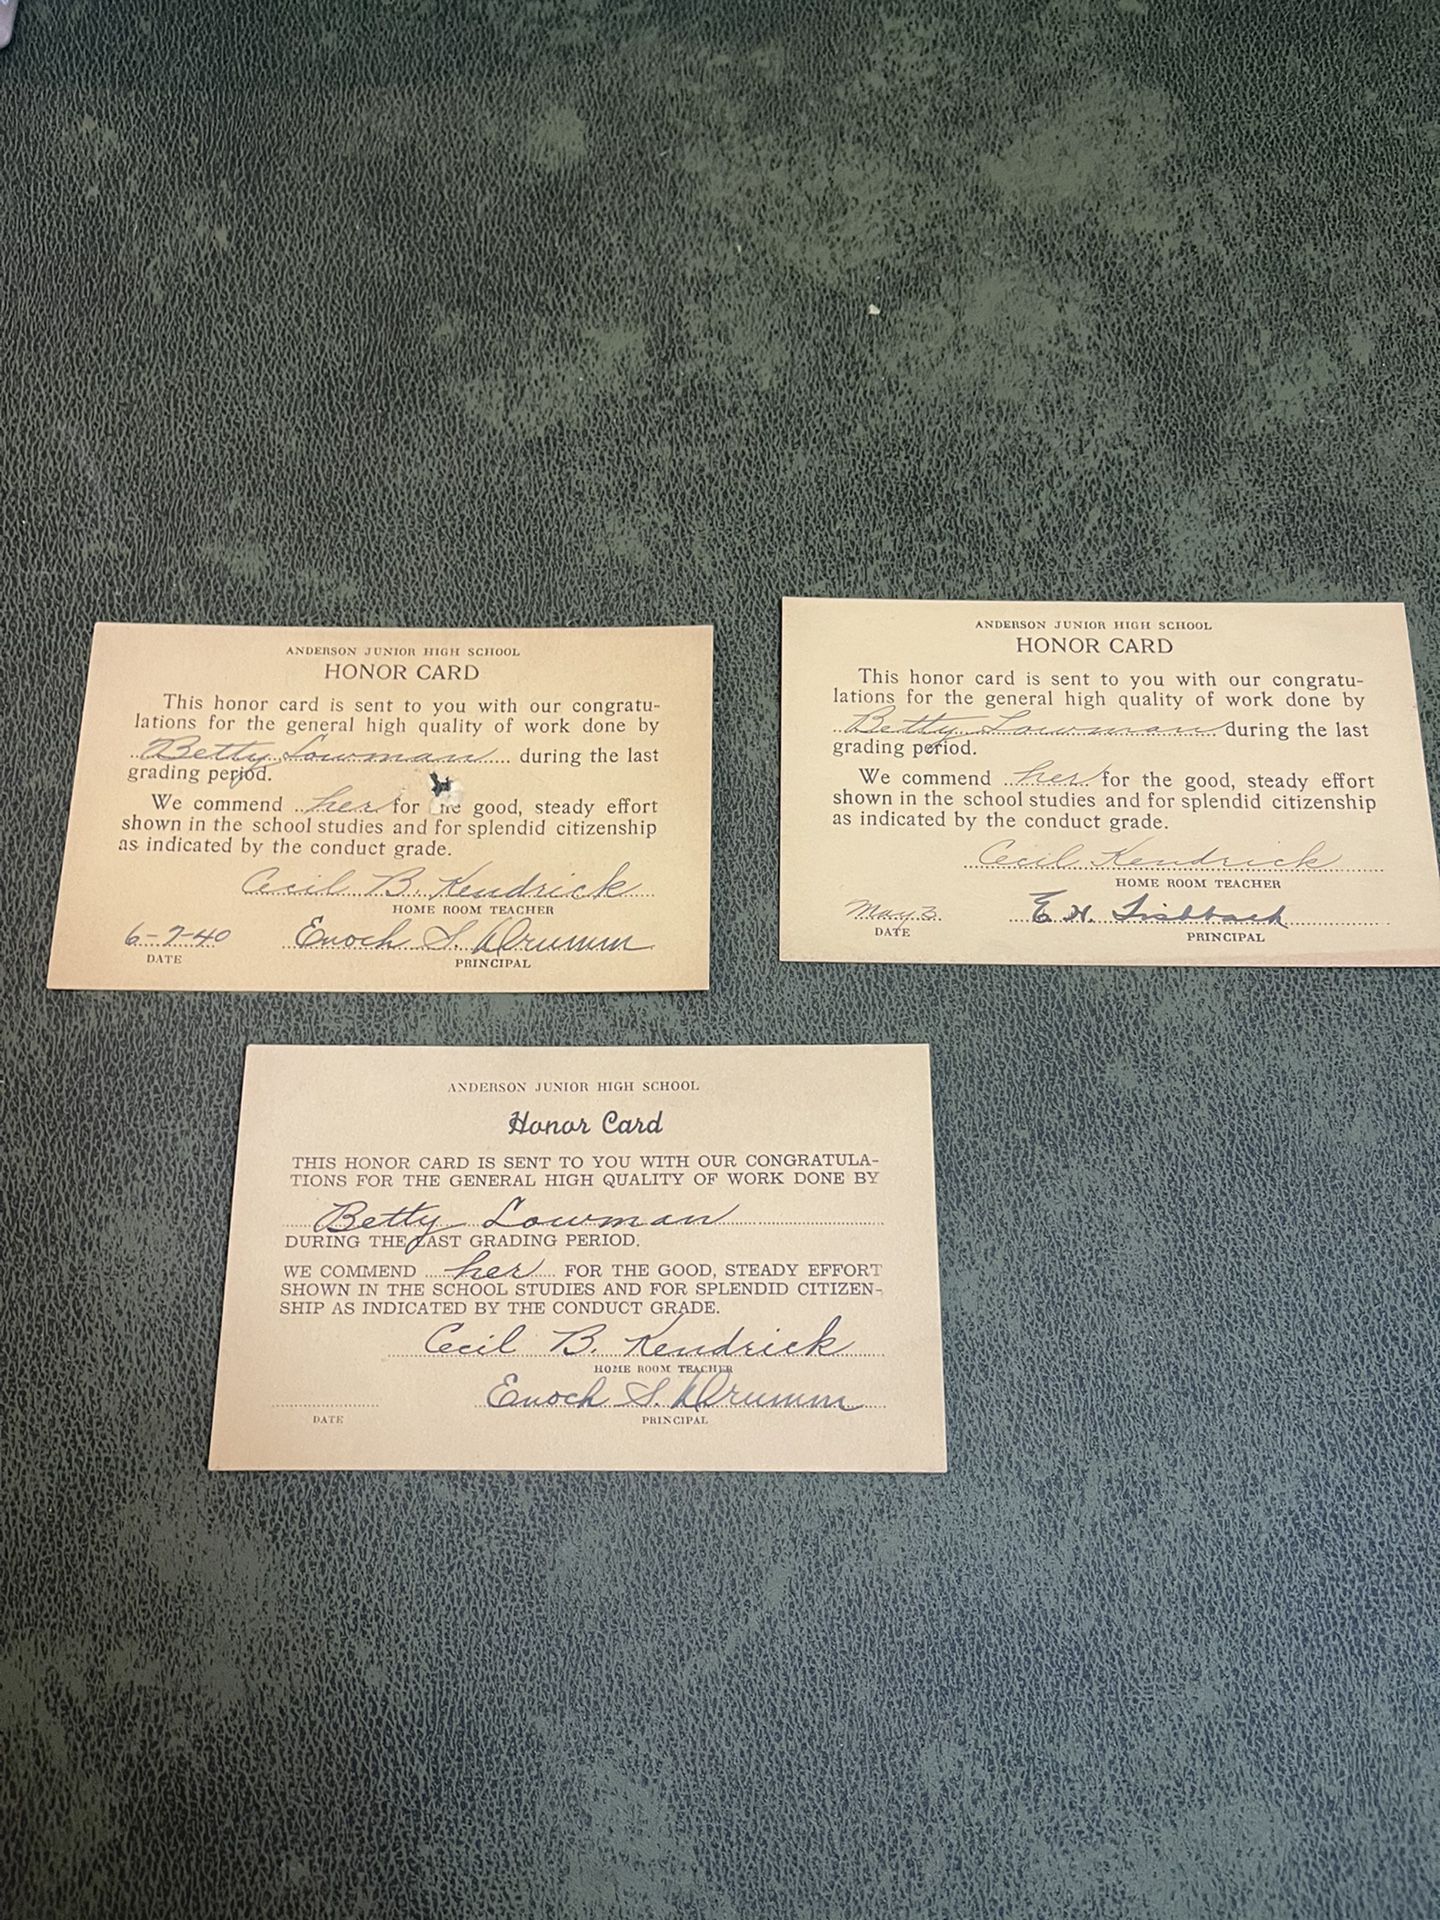 Lot of 3 1940 Anderson Junior High School Honor Cards